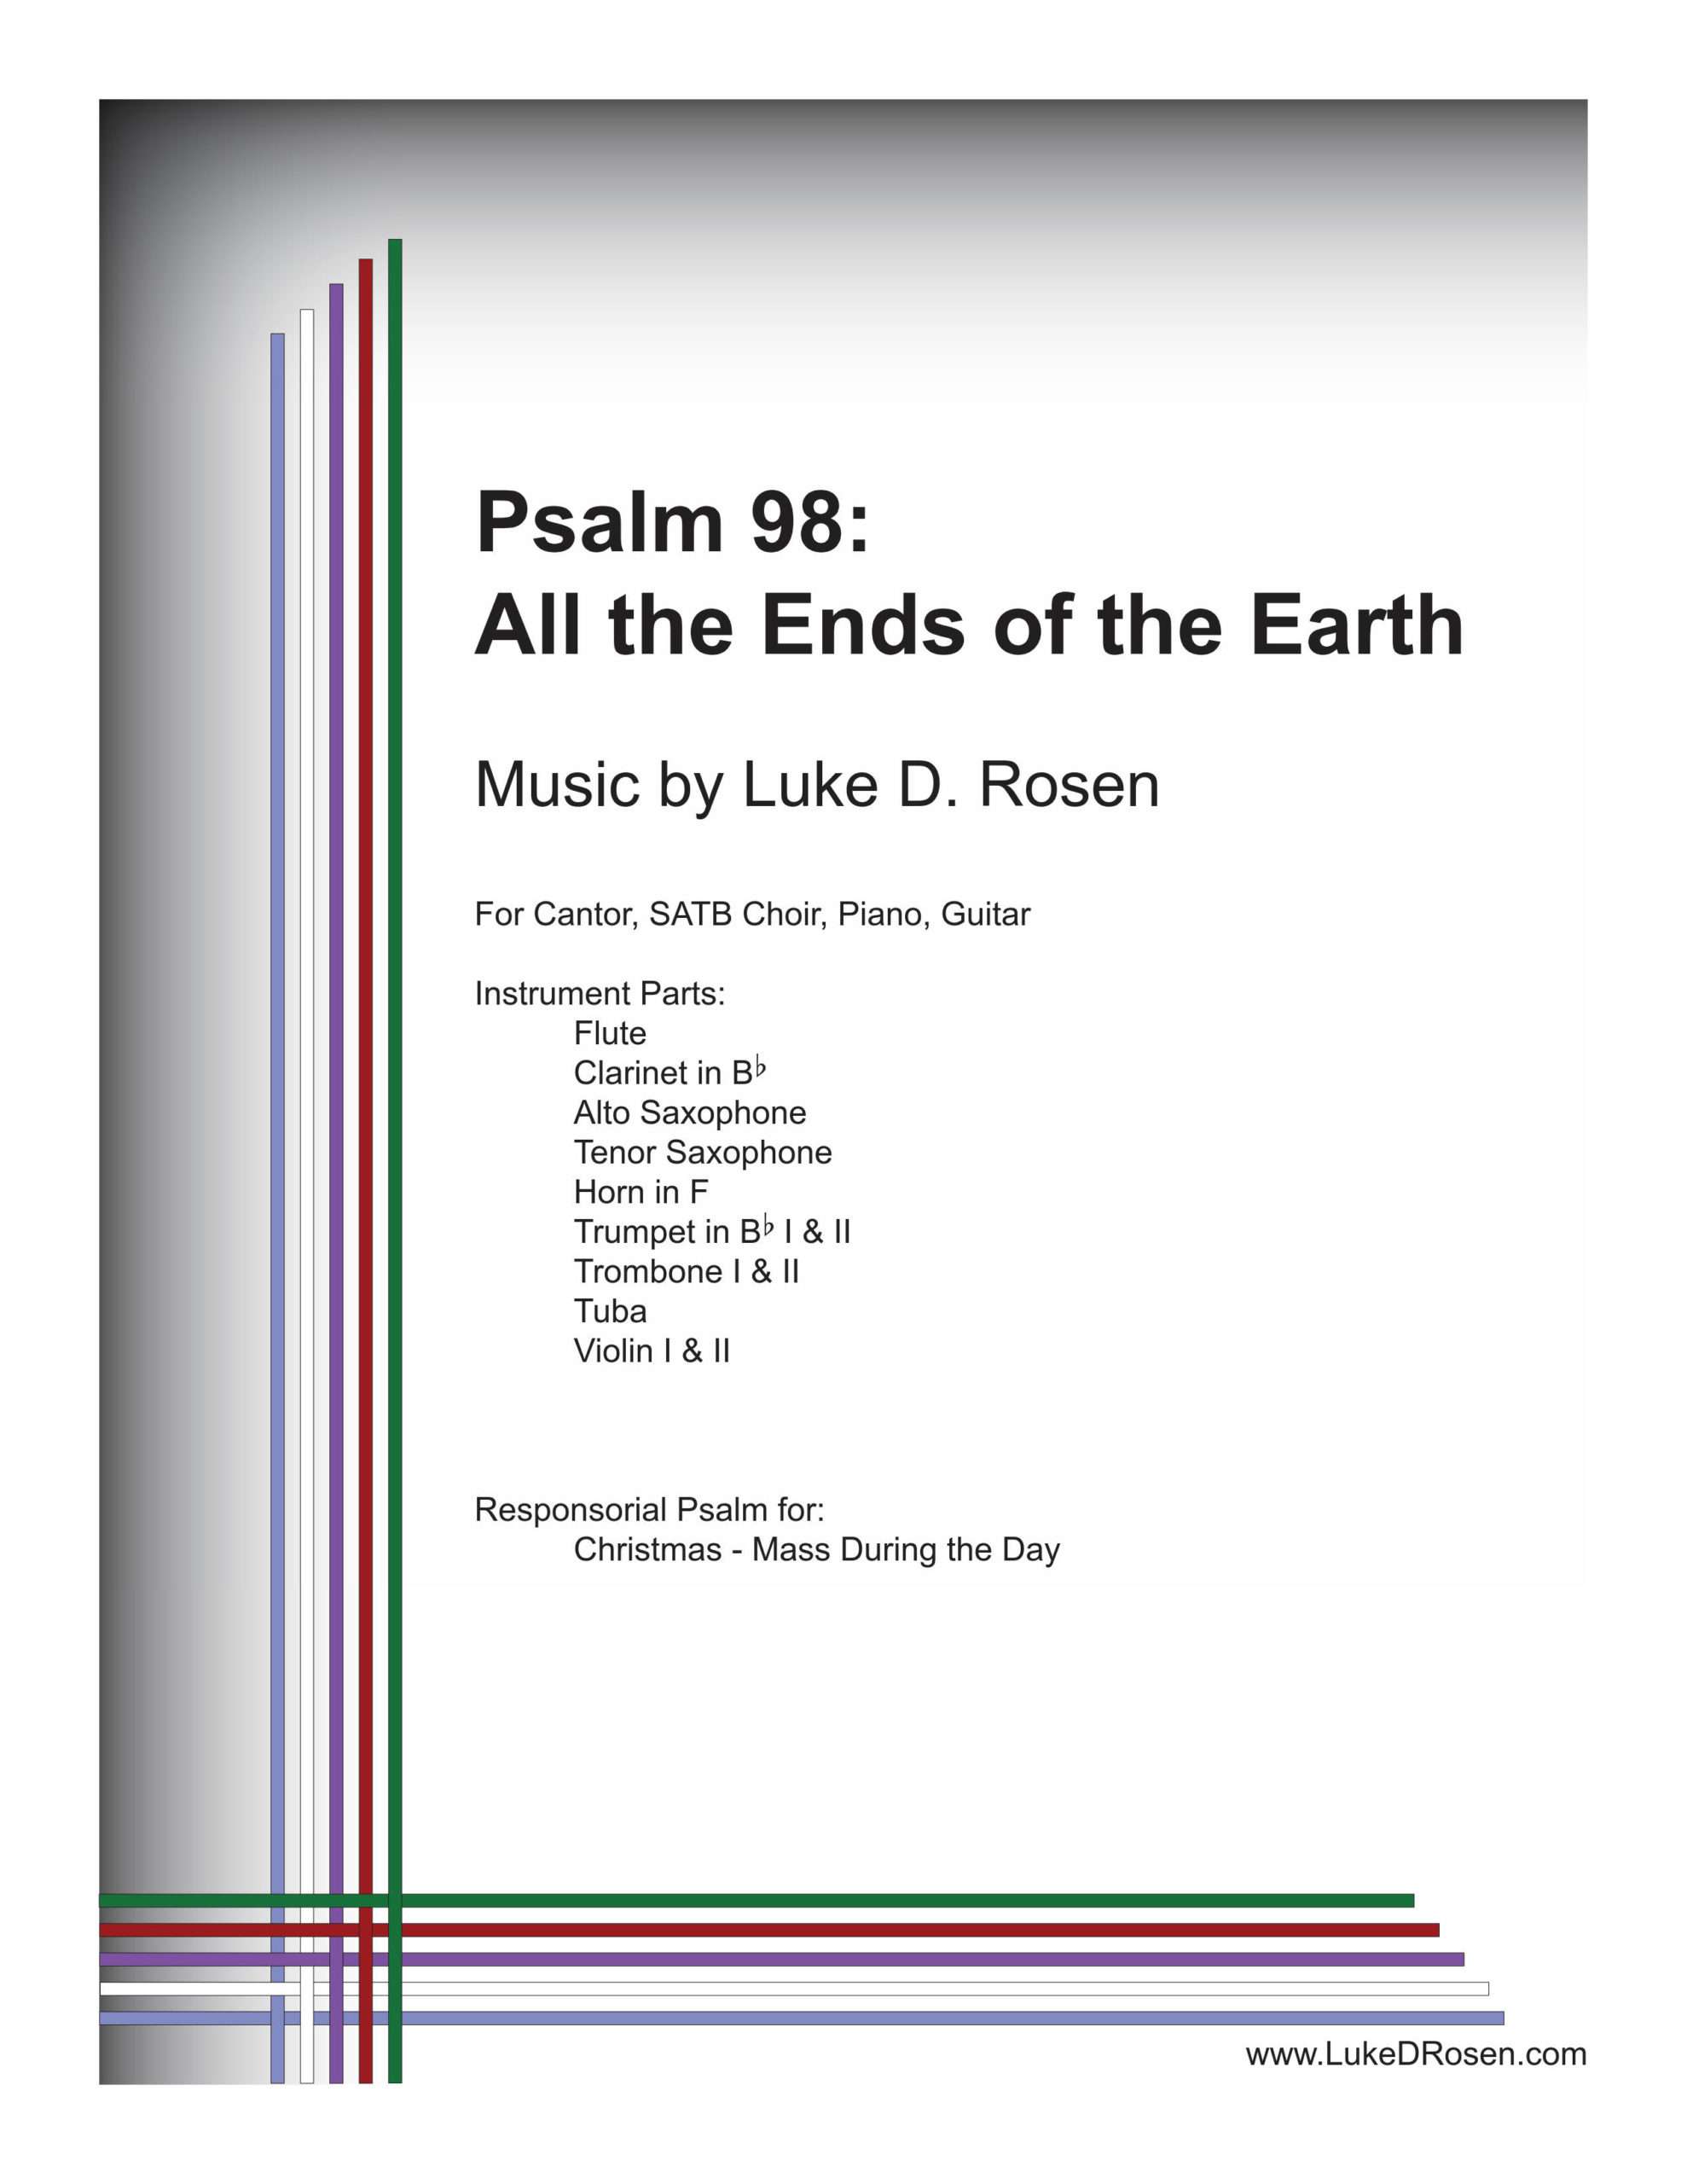 Psalm 98 – All the Ends of the Earth (Rosen)